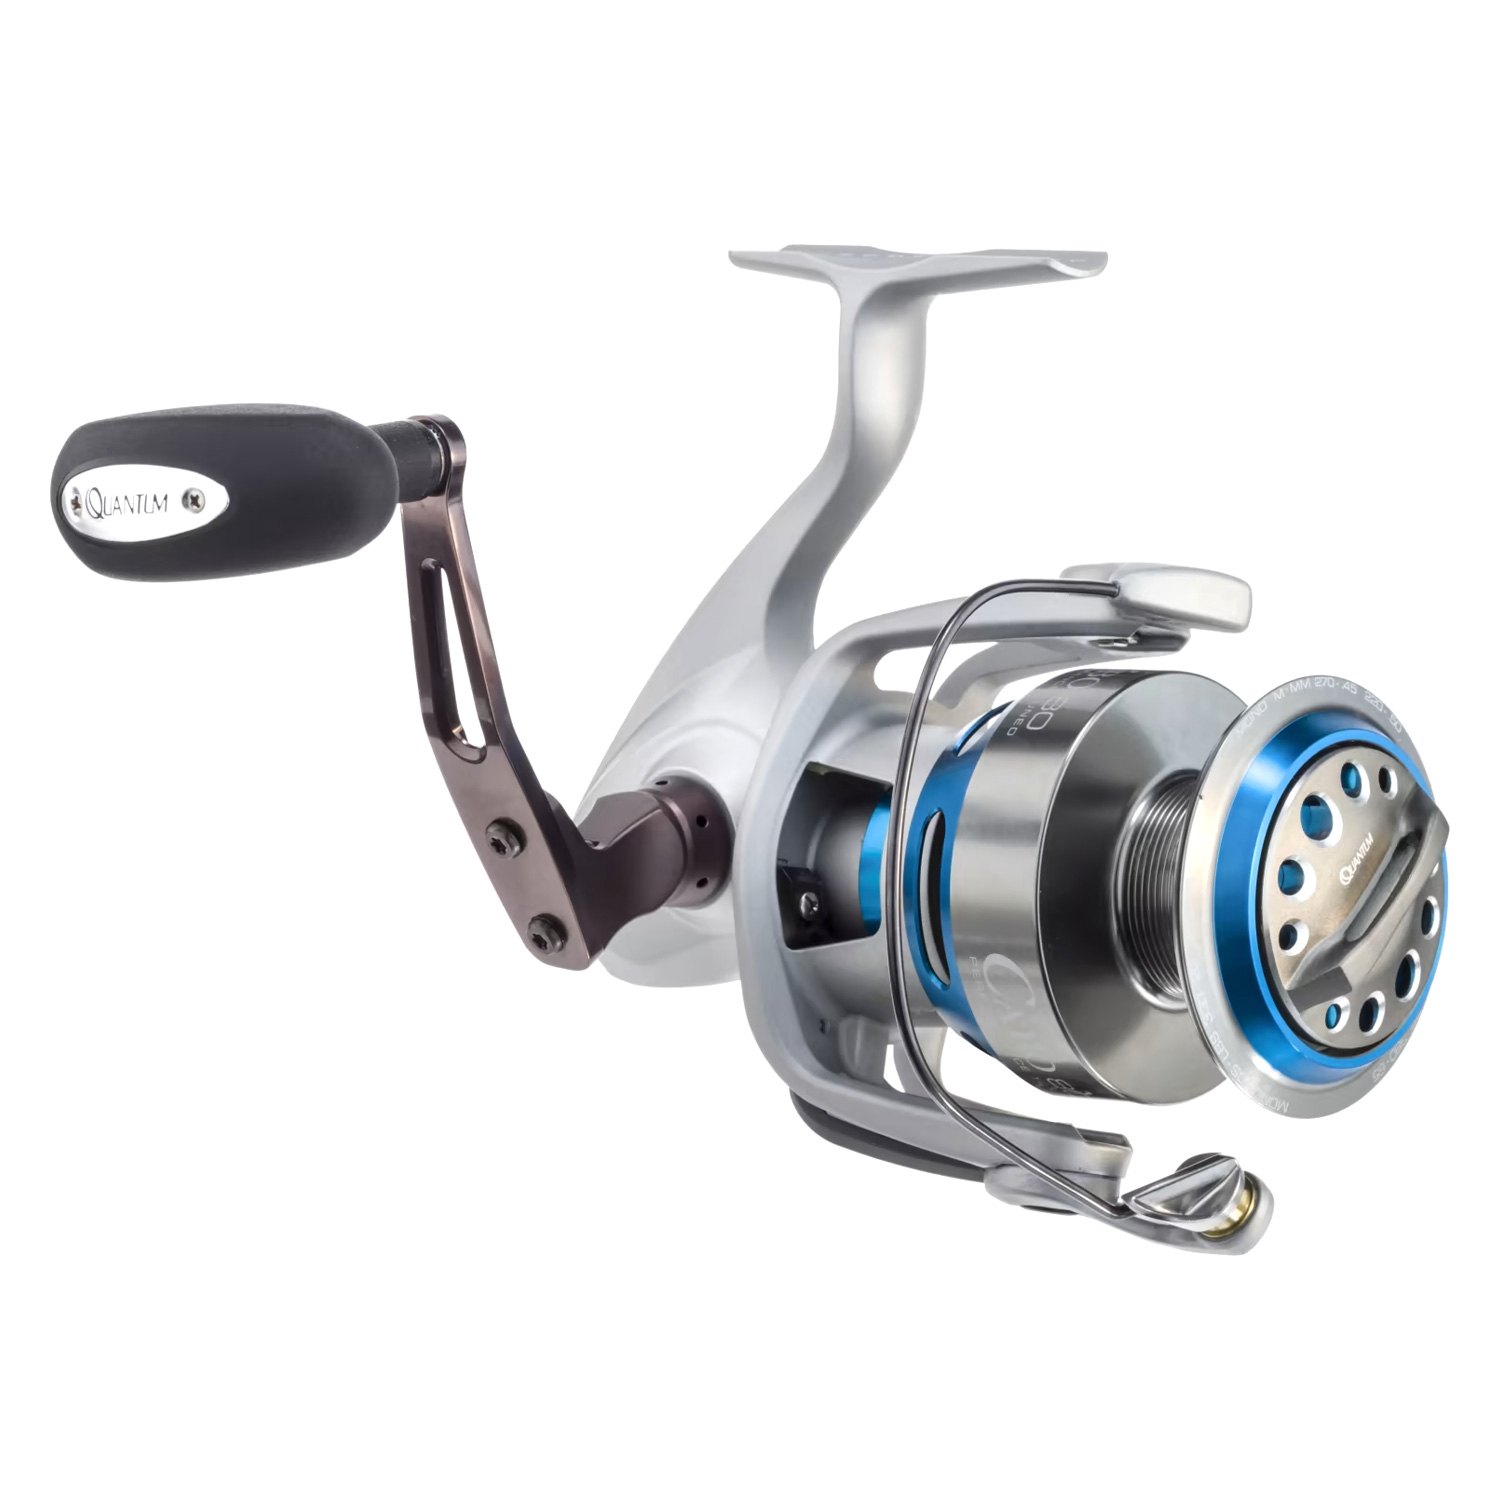 Quantum Cabo Saltwater Spinning Fishing Reel, Changeable Right- or  Left-Hand Retrieve, Magnum CSC Drag System, SCR Aluminum Body and Side  Cover